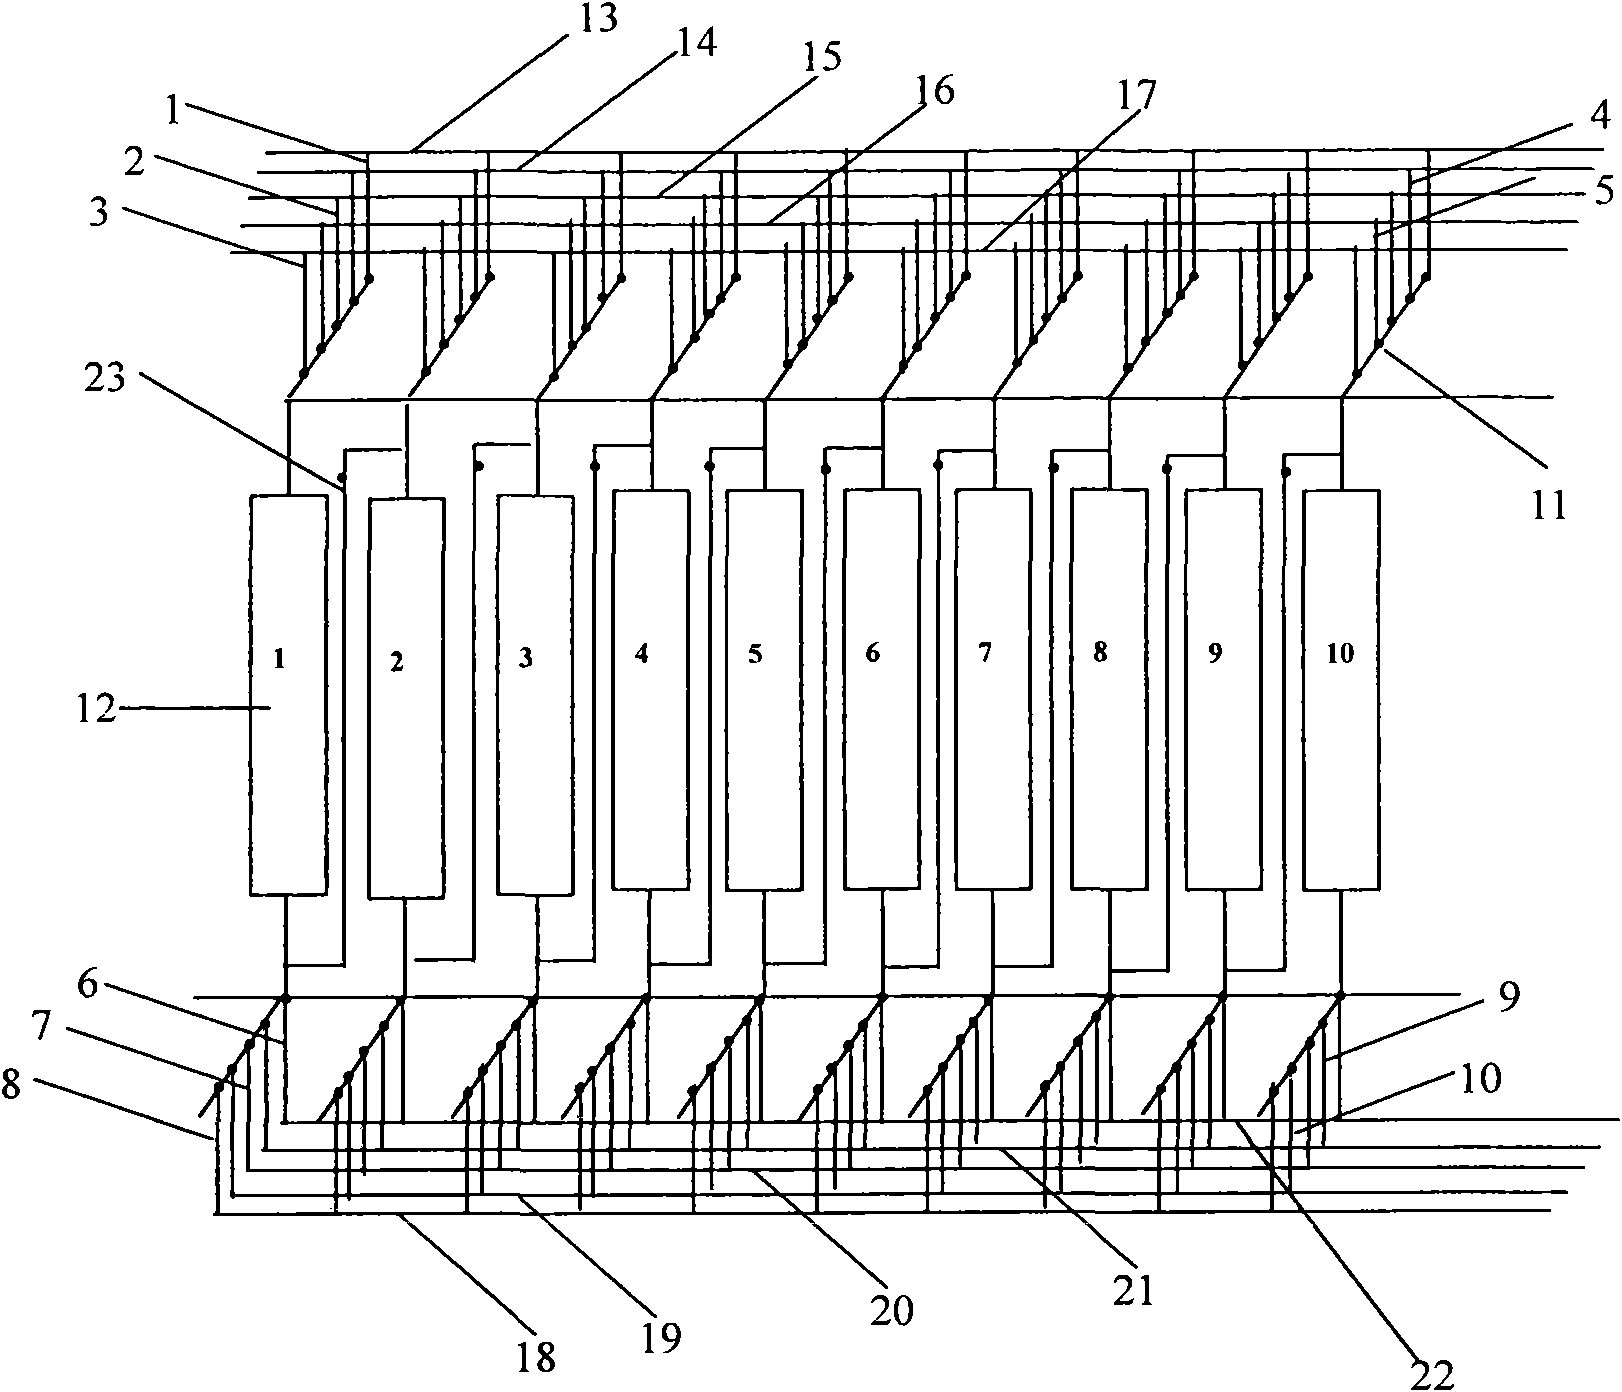 Continuous ion exchange device and method for extracting lithium from salt lake brine